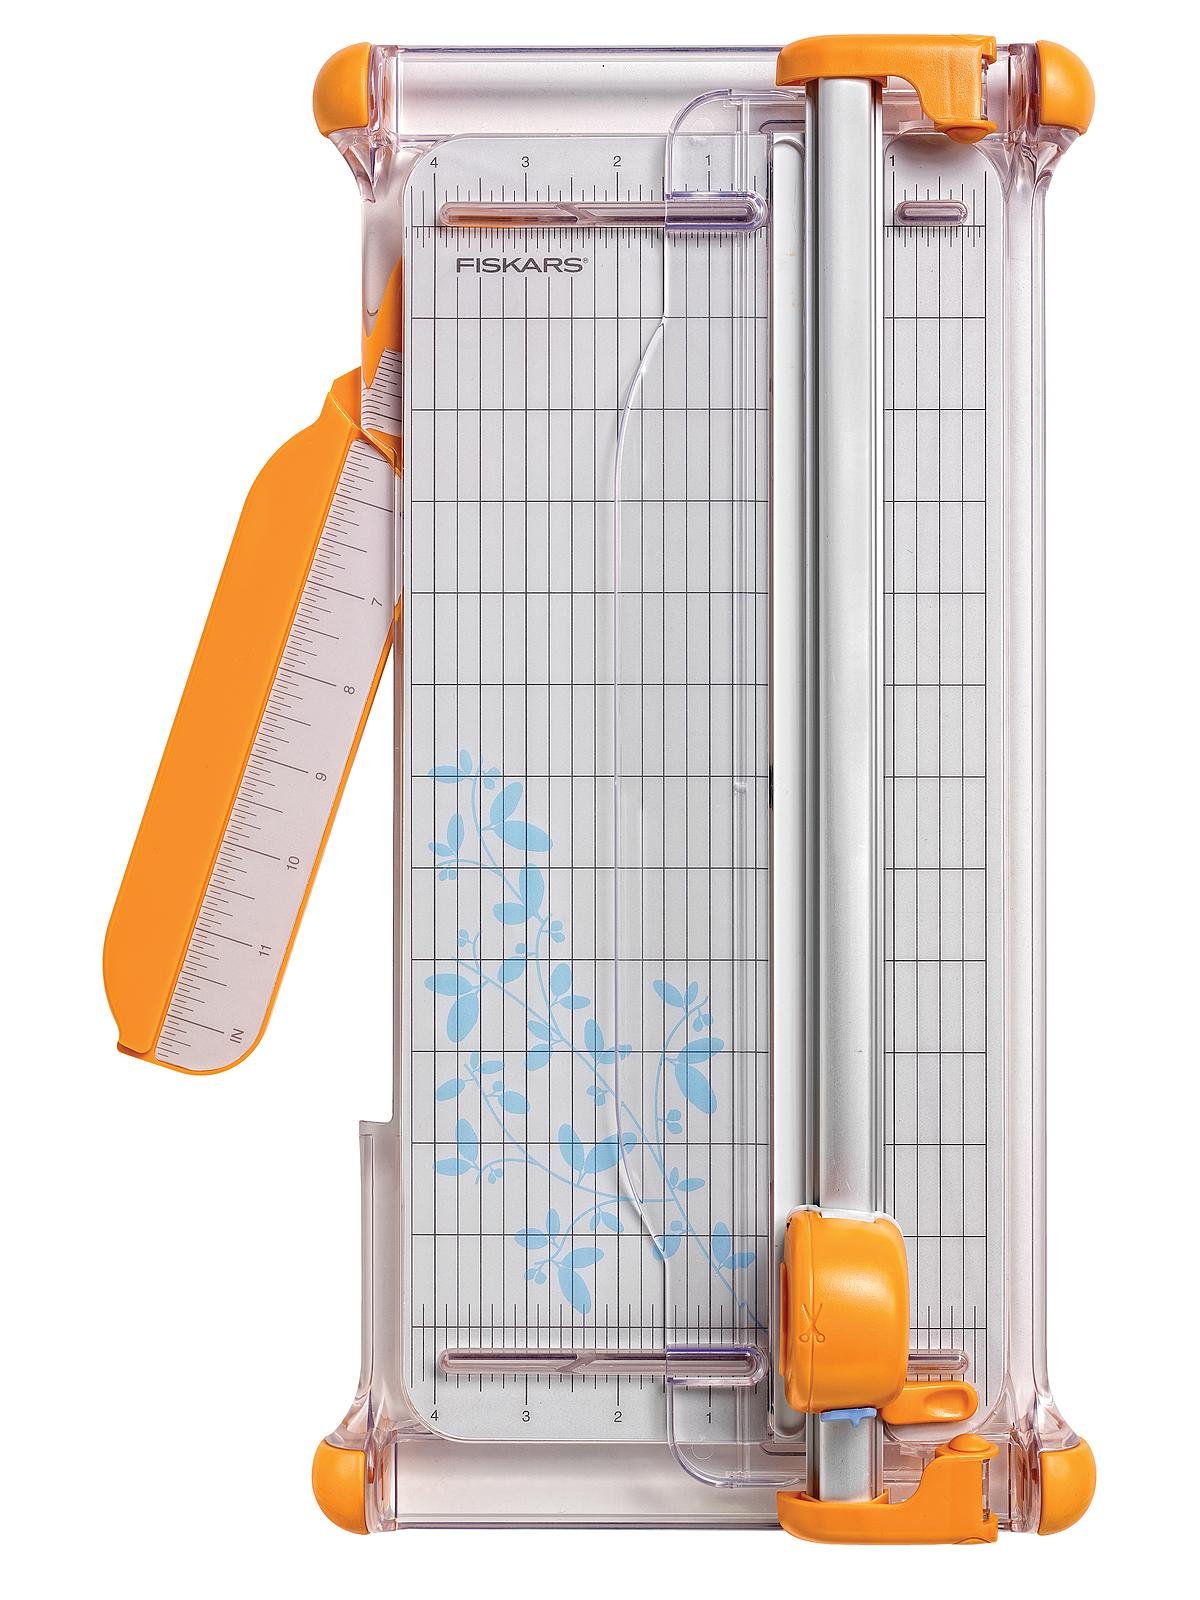 Fiskars Portable Rotary Paper Trimmer 12 in.